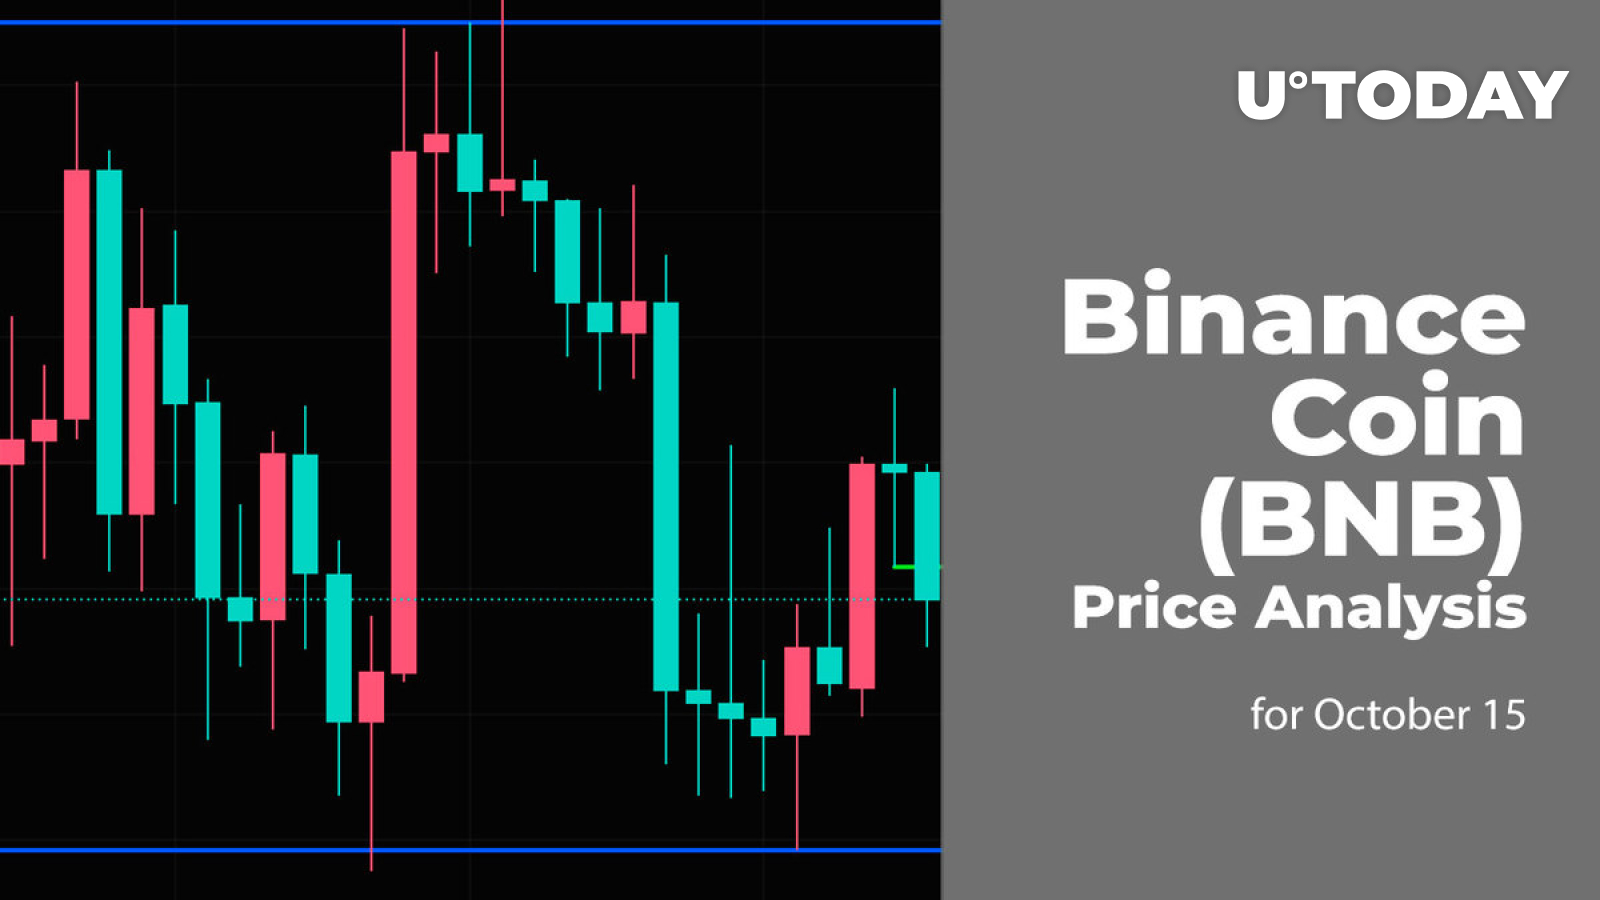 Binance Coin (BNB) Price Analysis for October 15